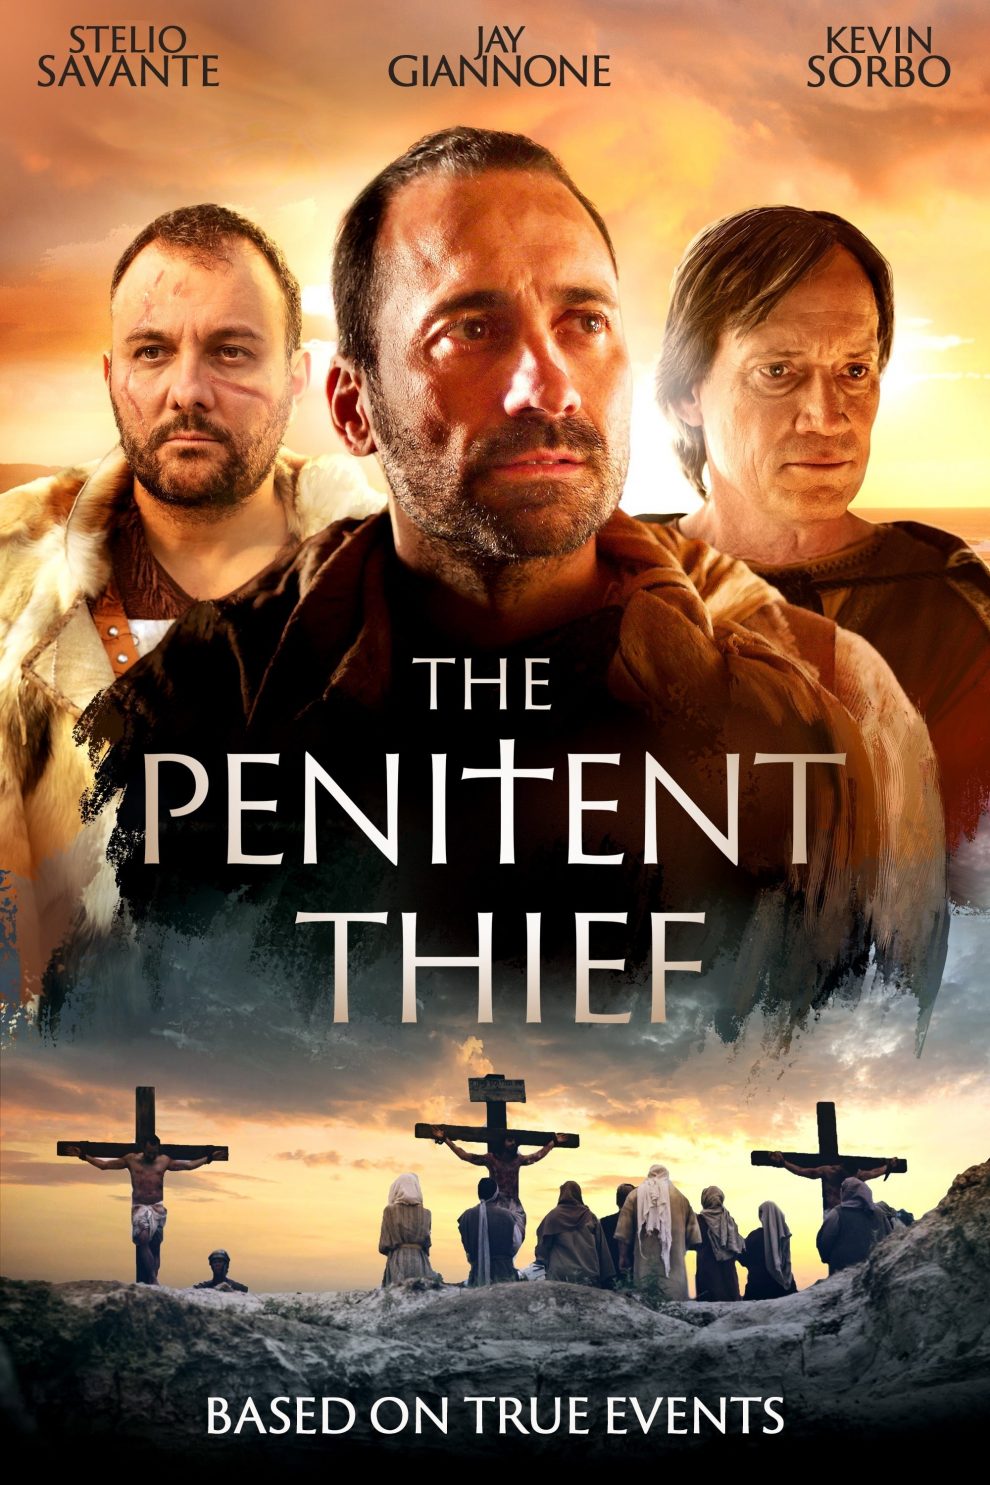 Poster for the movie "The Penitent Thief"